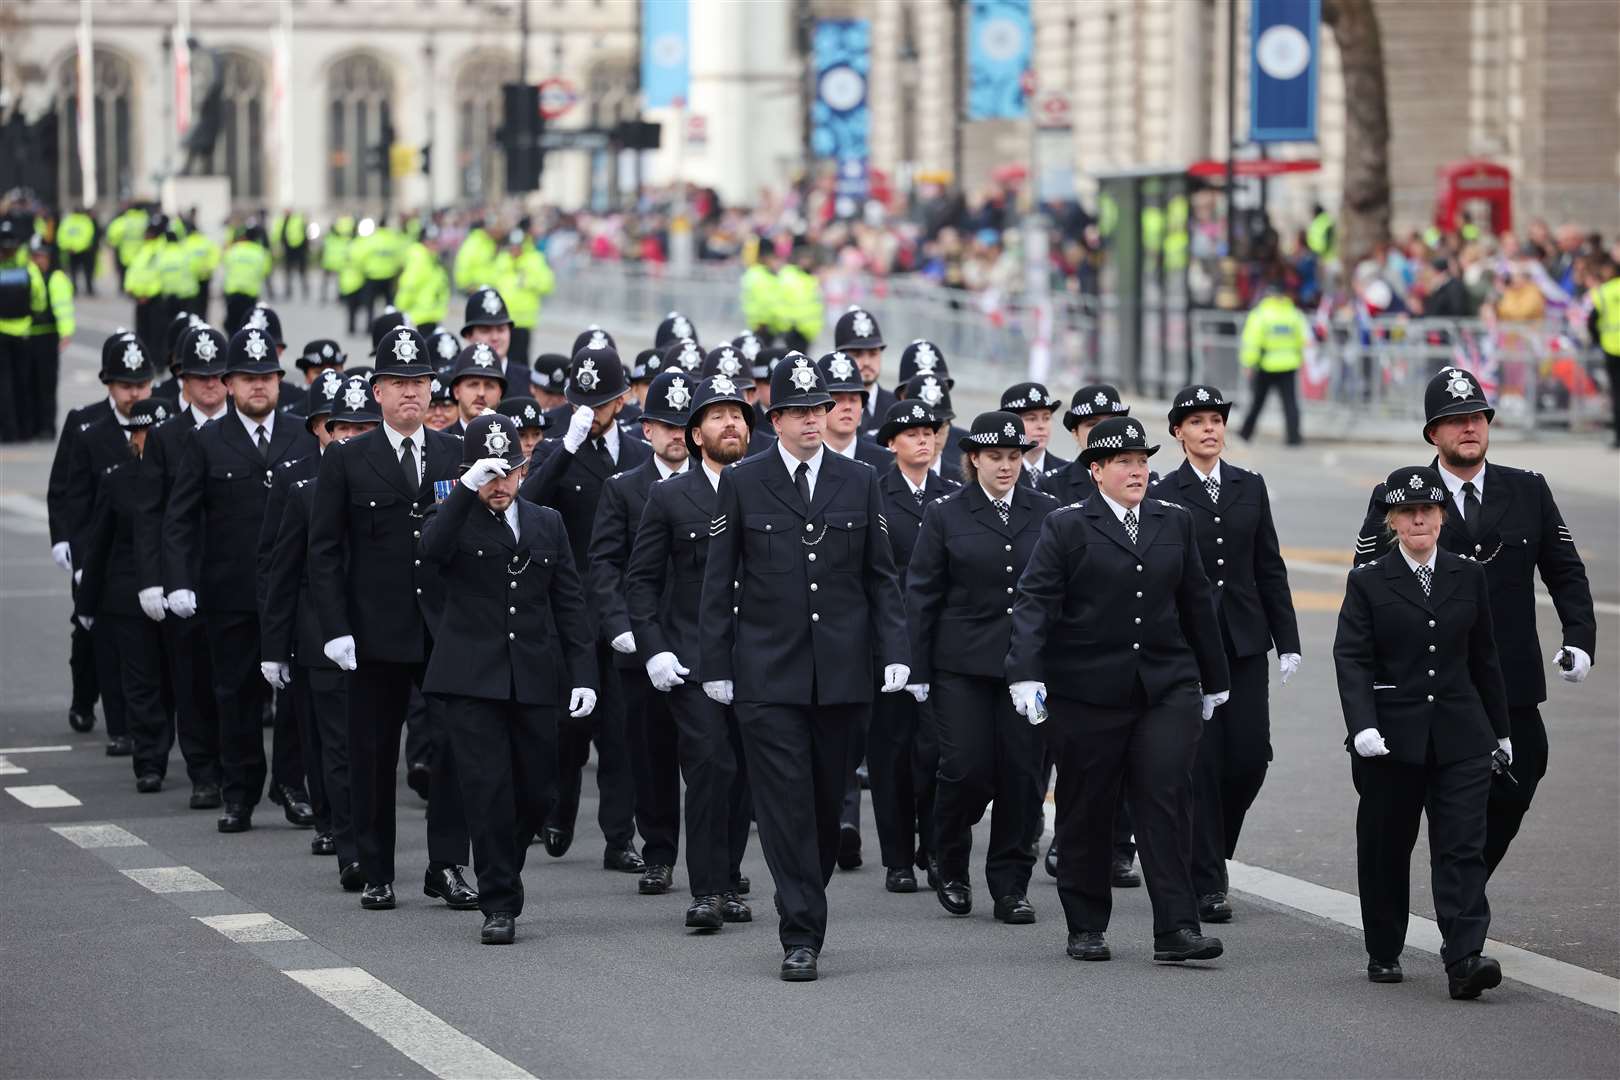 Police officers arrive for duty (Rob Pinney/PA)